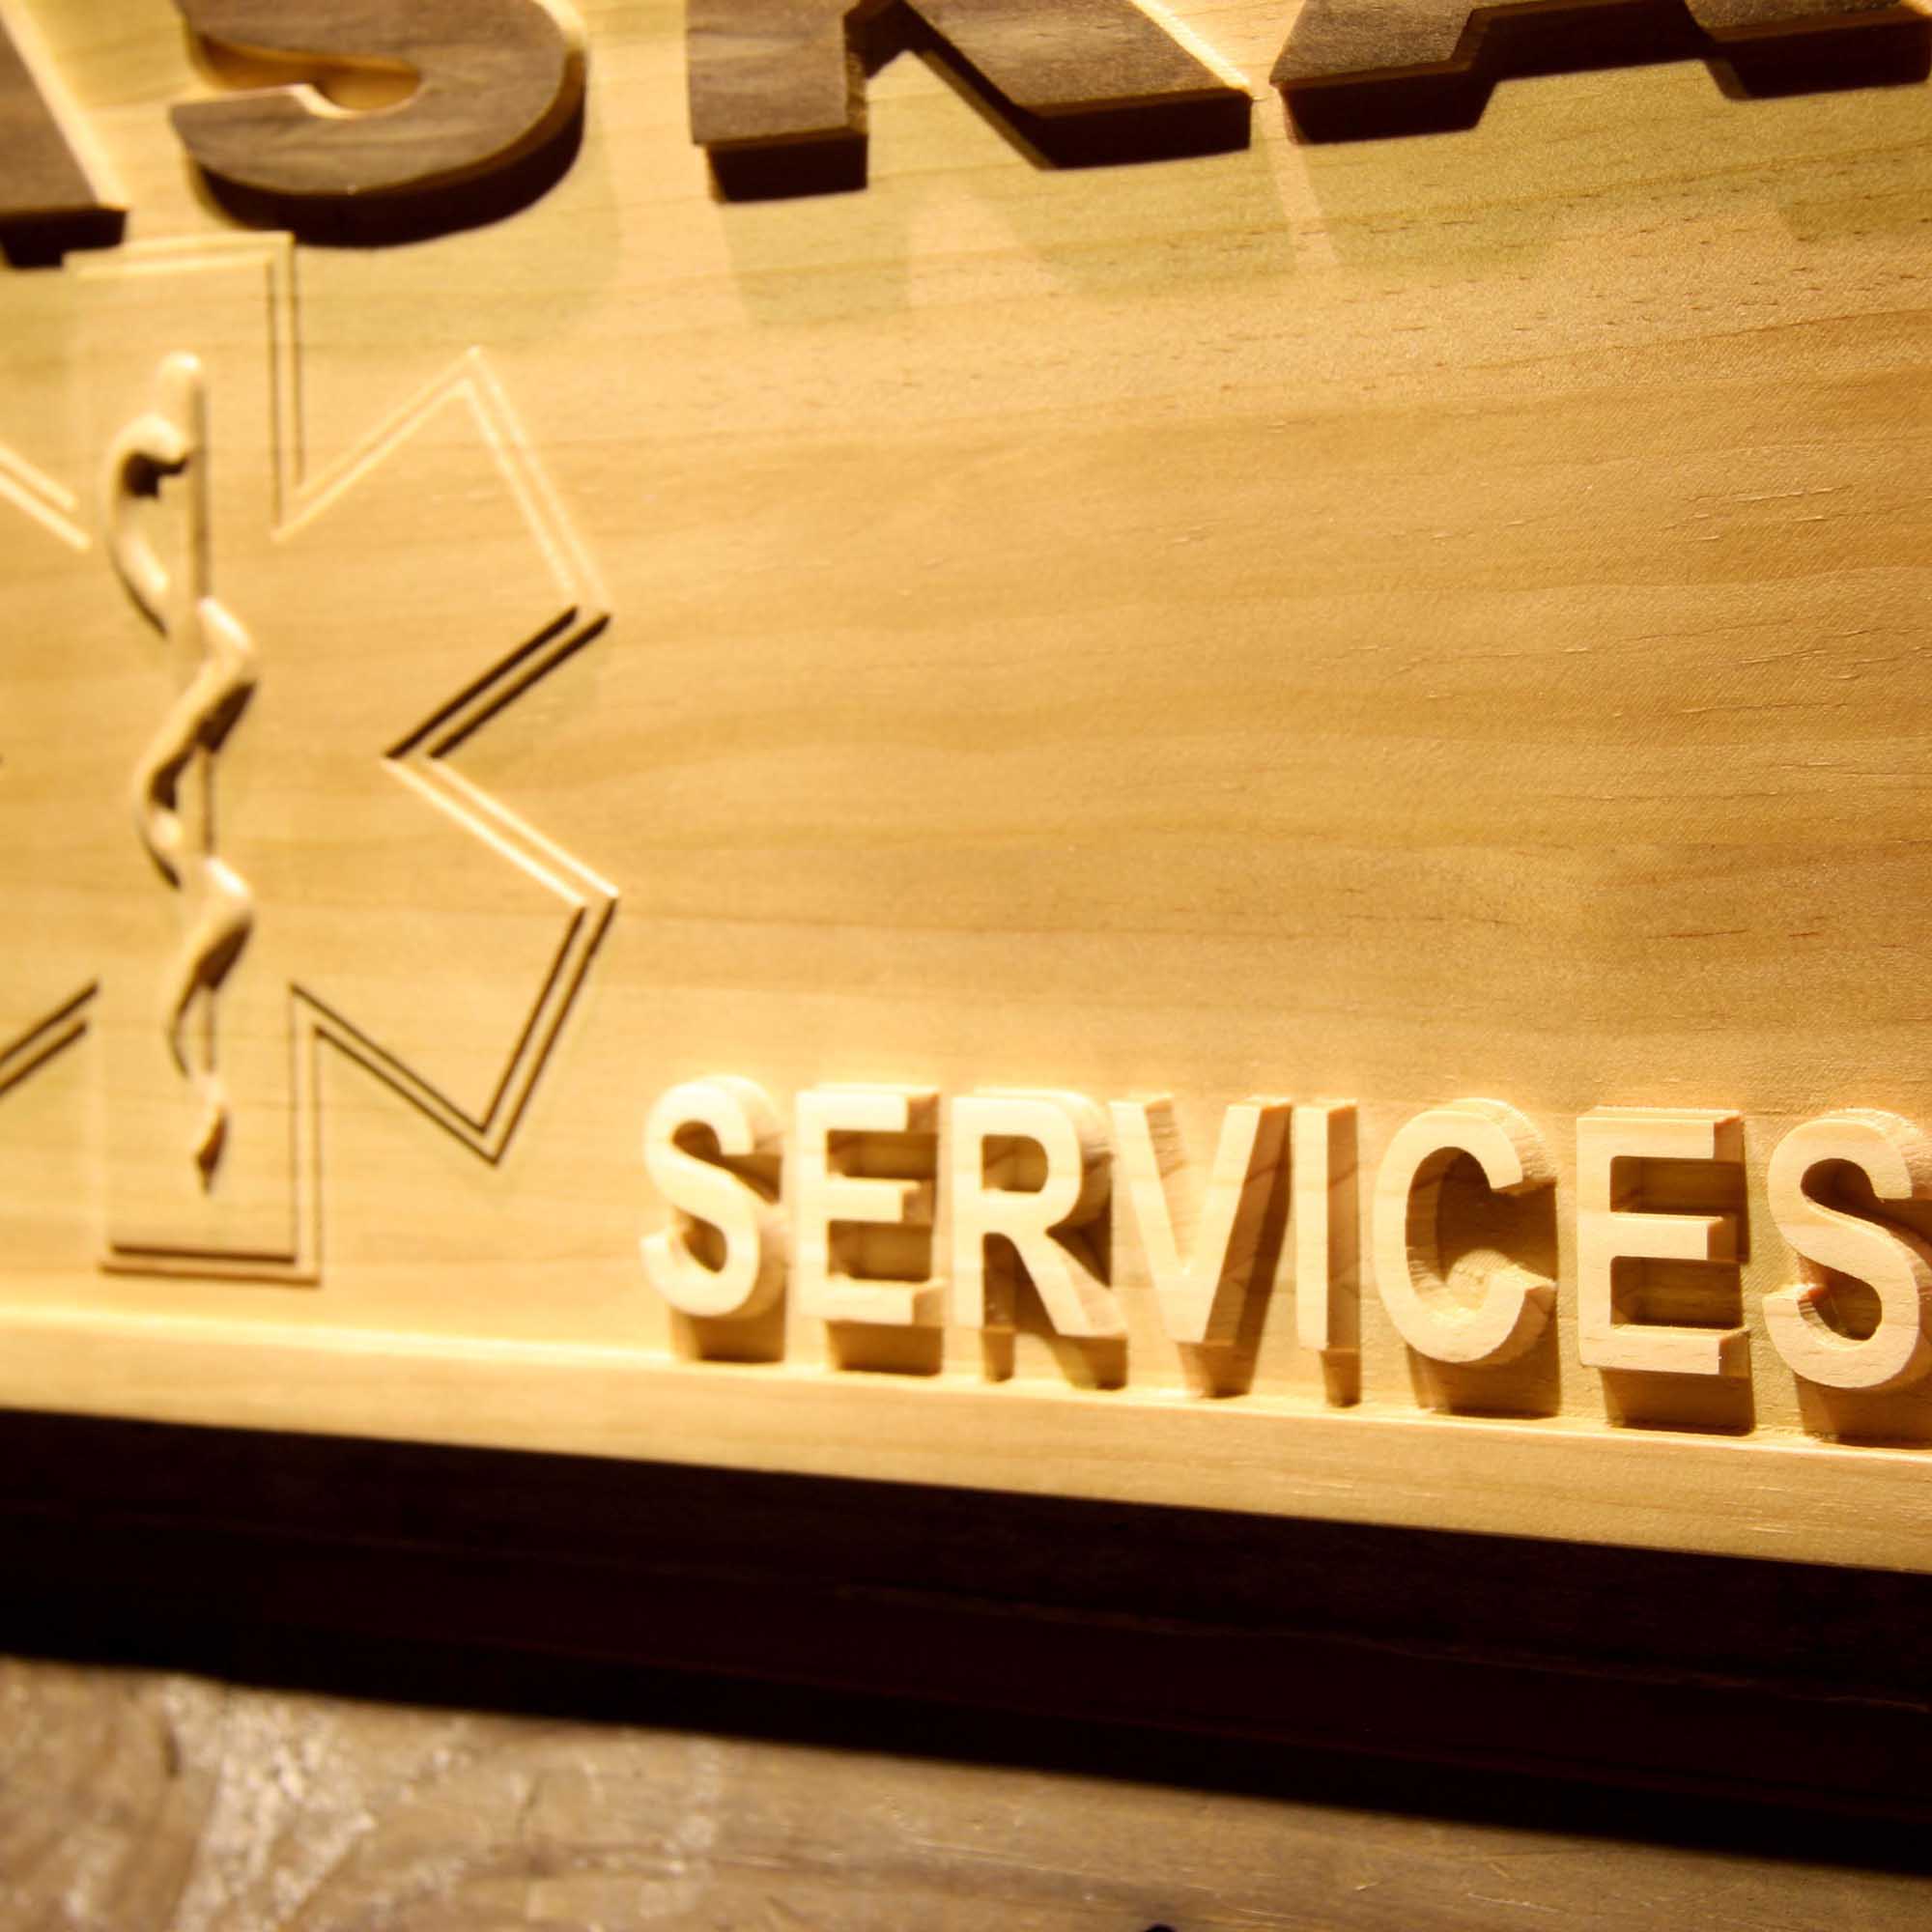 Personalized Medical Services Gifts Wood Engraved Wooden Sign